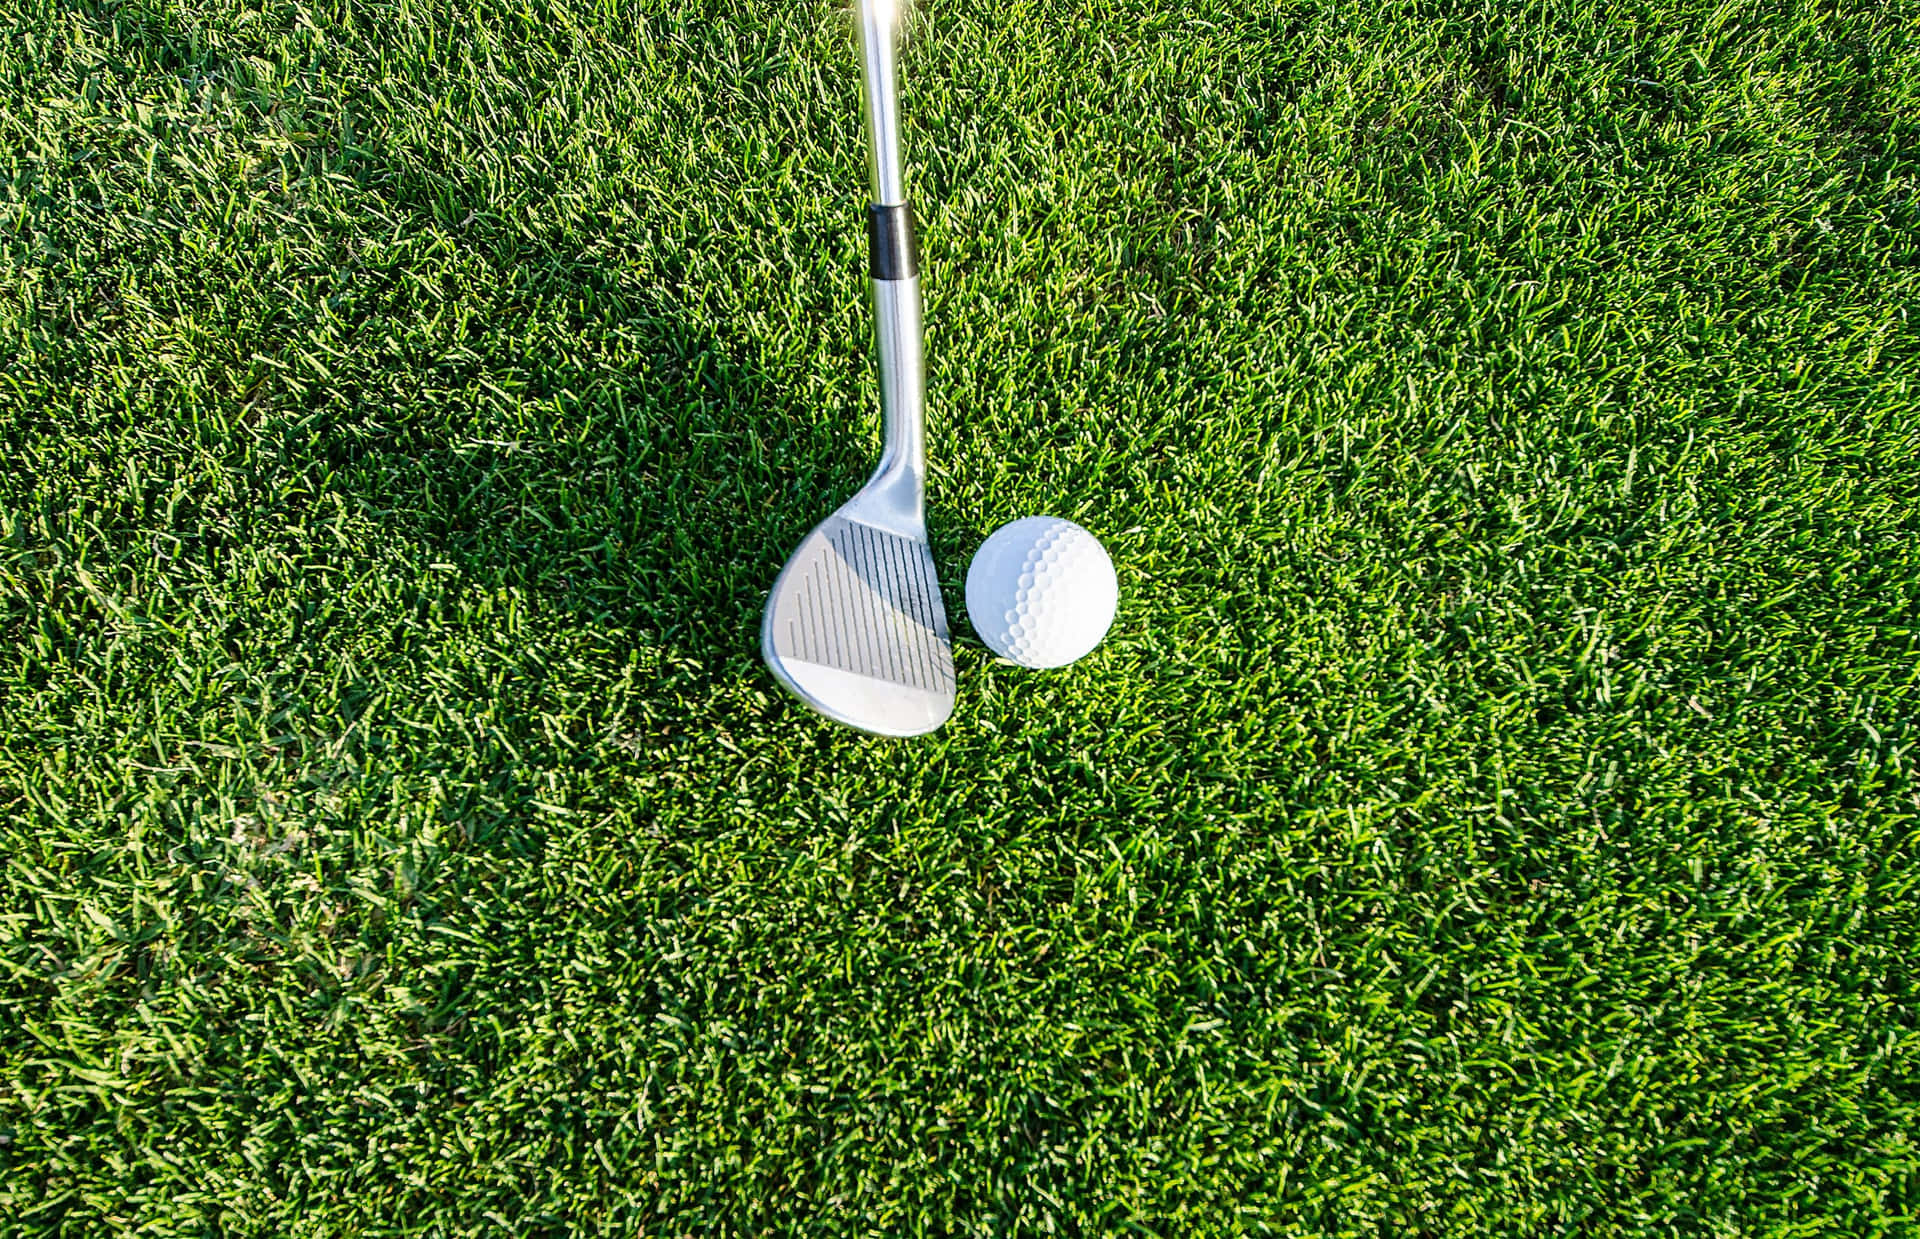 A Golf Club And Ball On The Grass